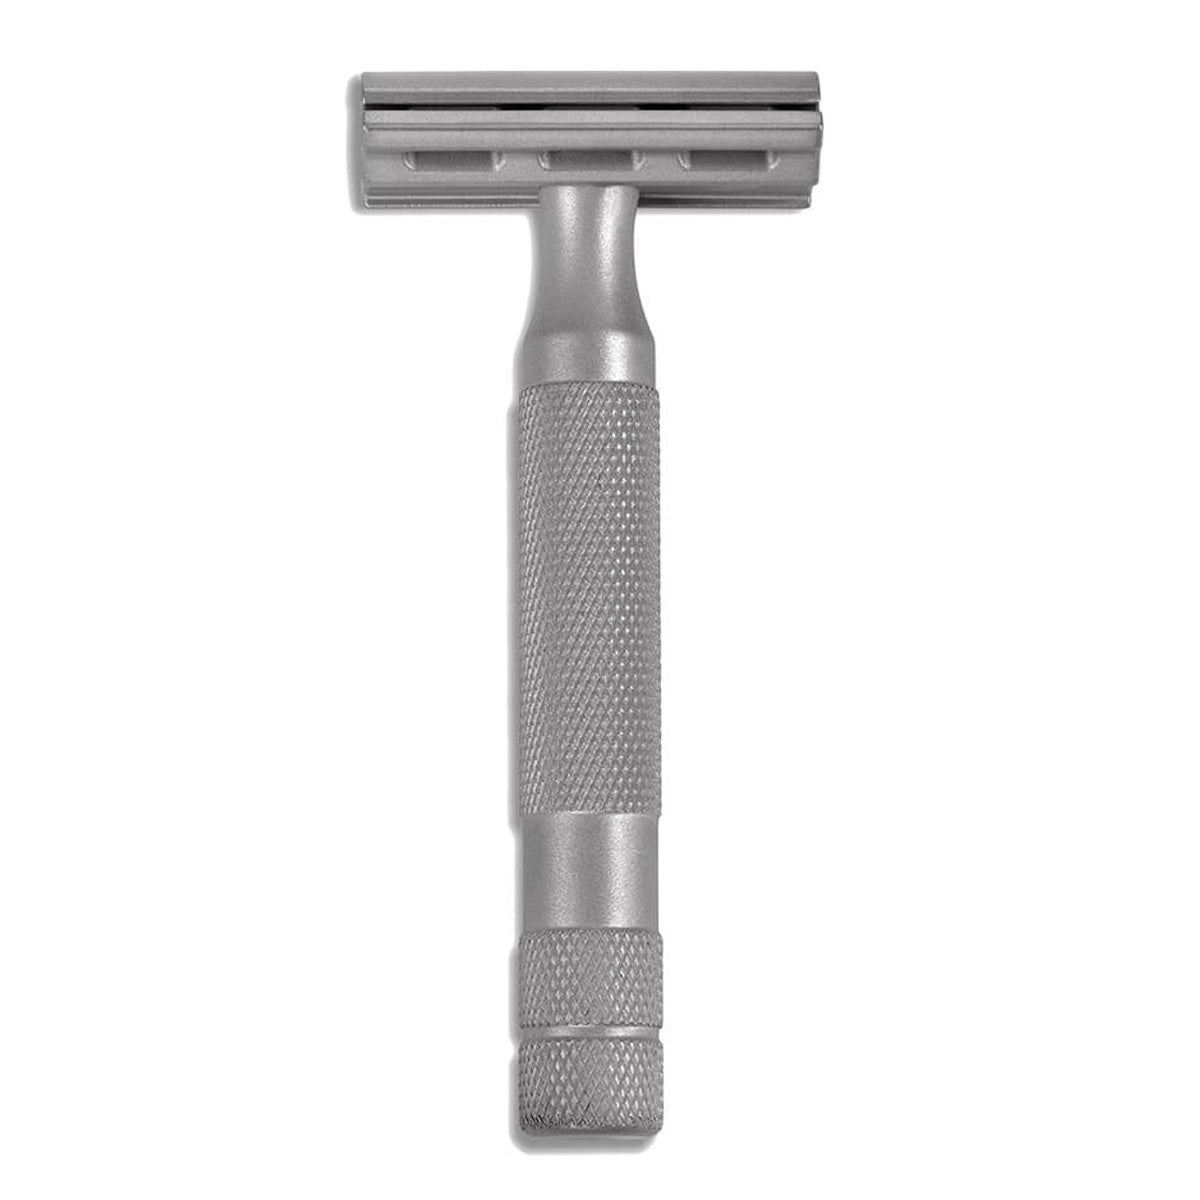 Primary image of Stainless Steel Rockwell 6S Adjustable Safety Razor